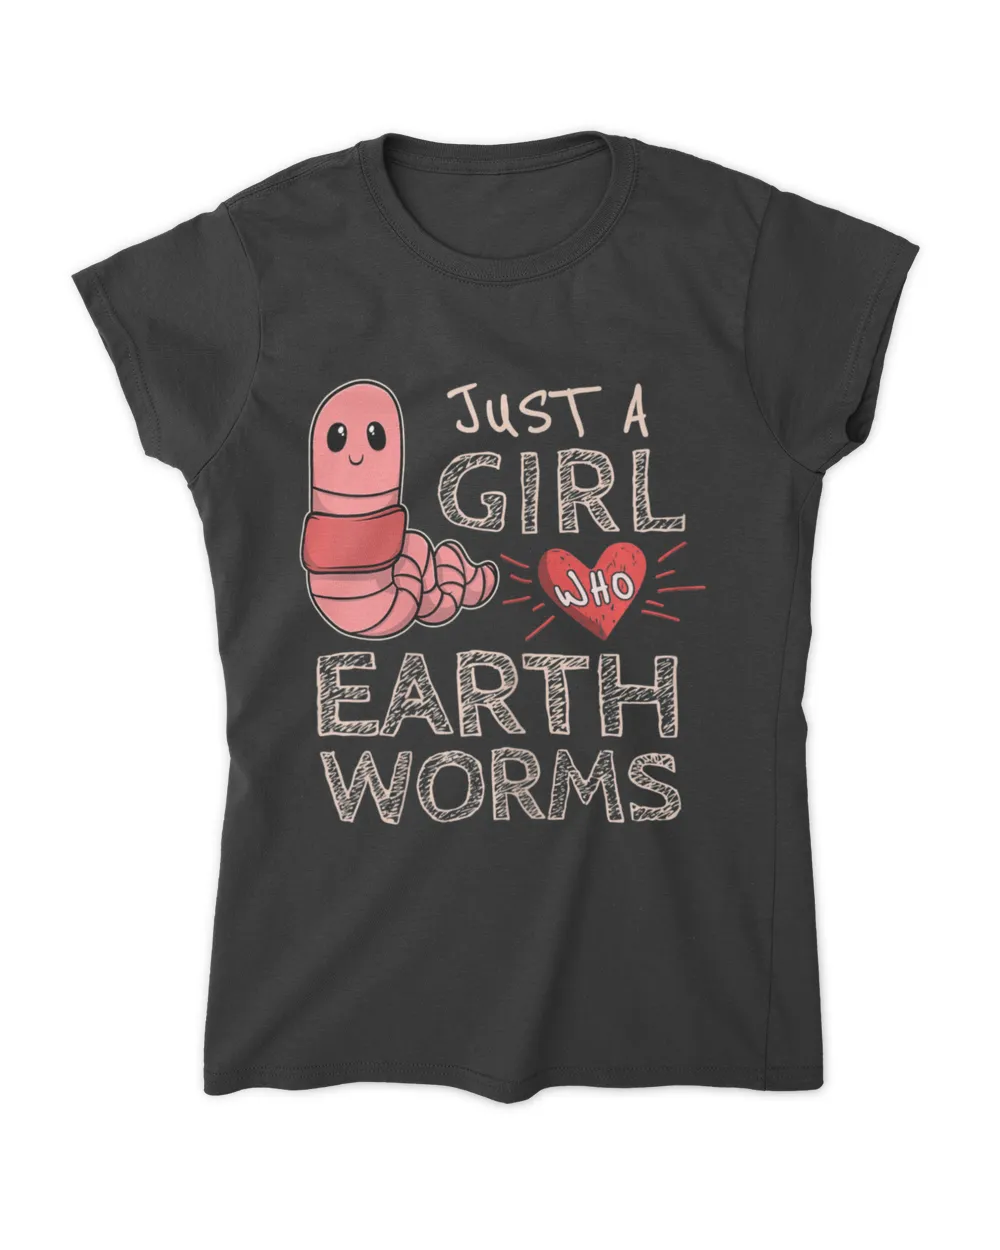 Just A Girl Who Loves Earthworms